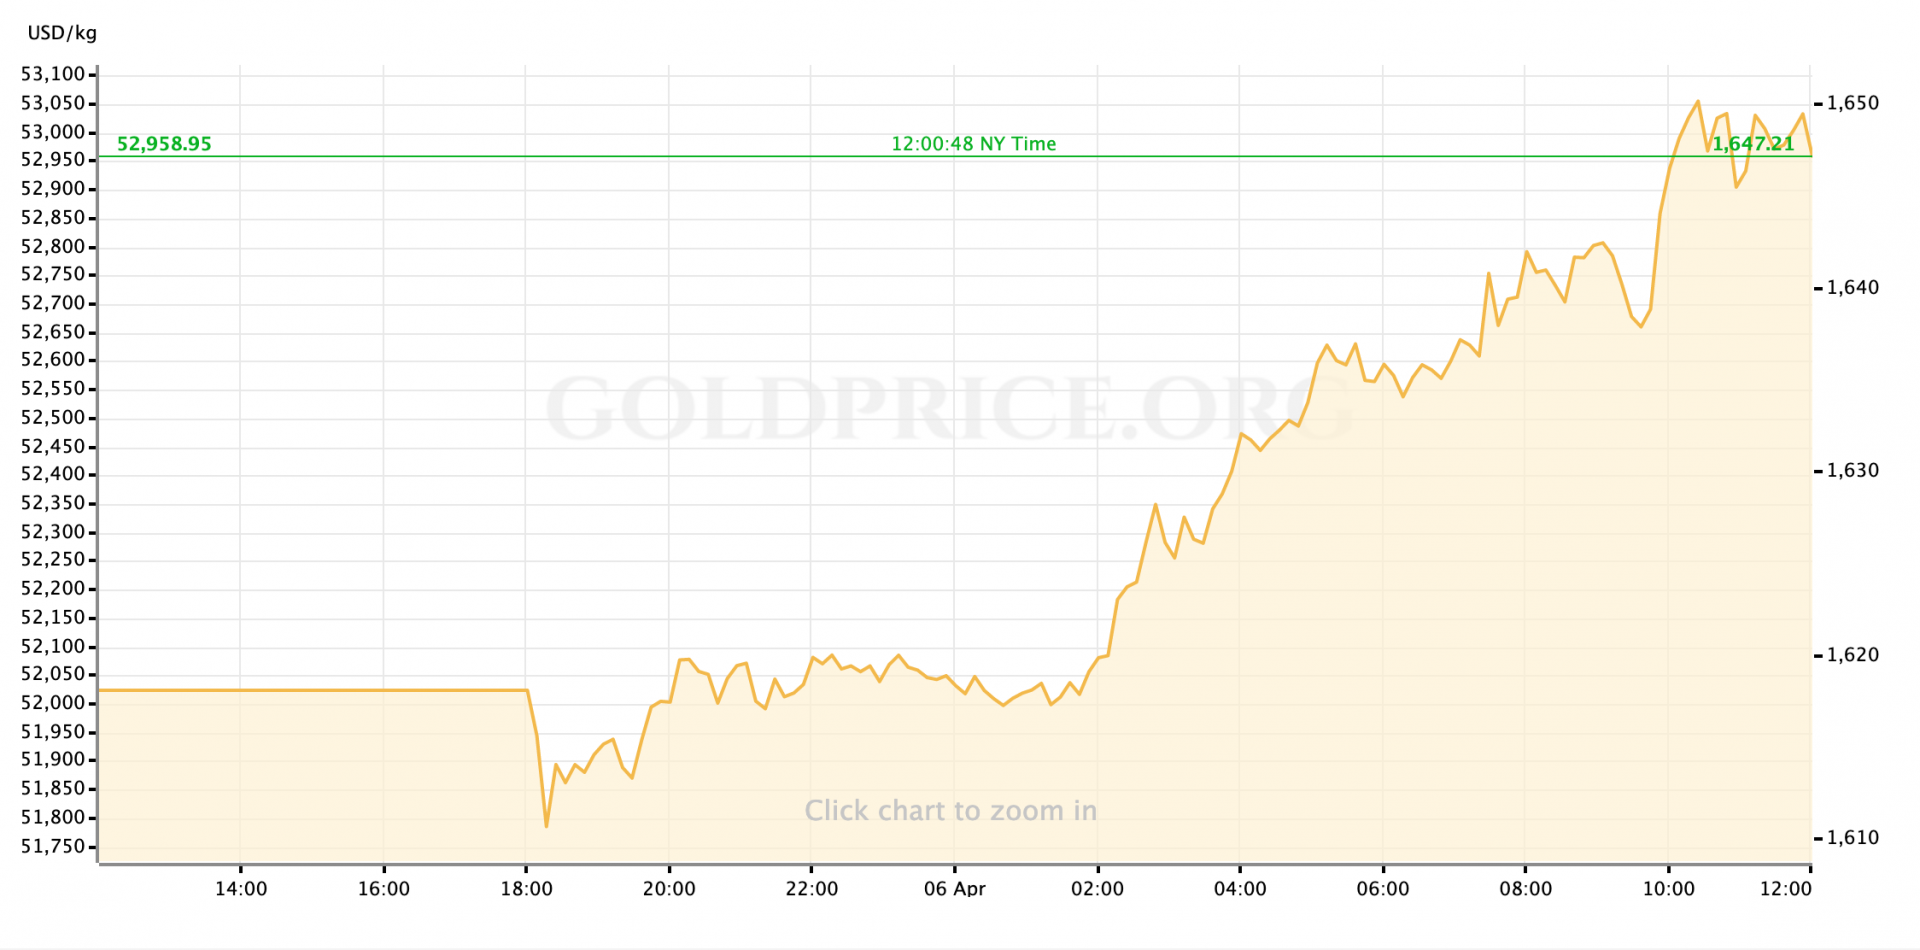 gold price today constantly rising